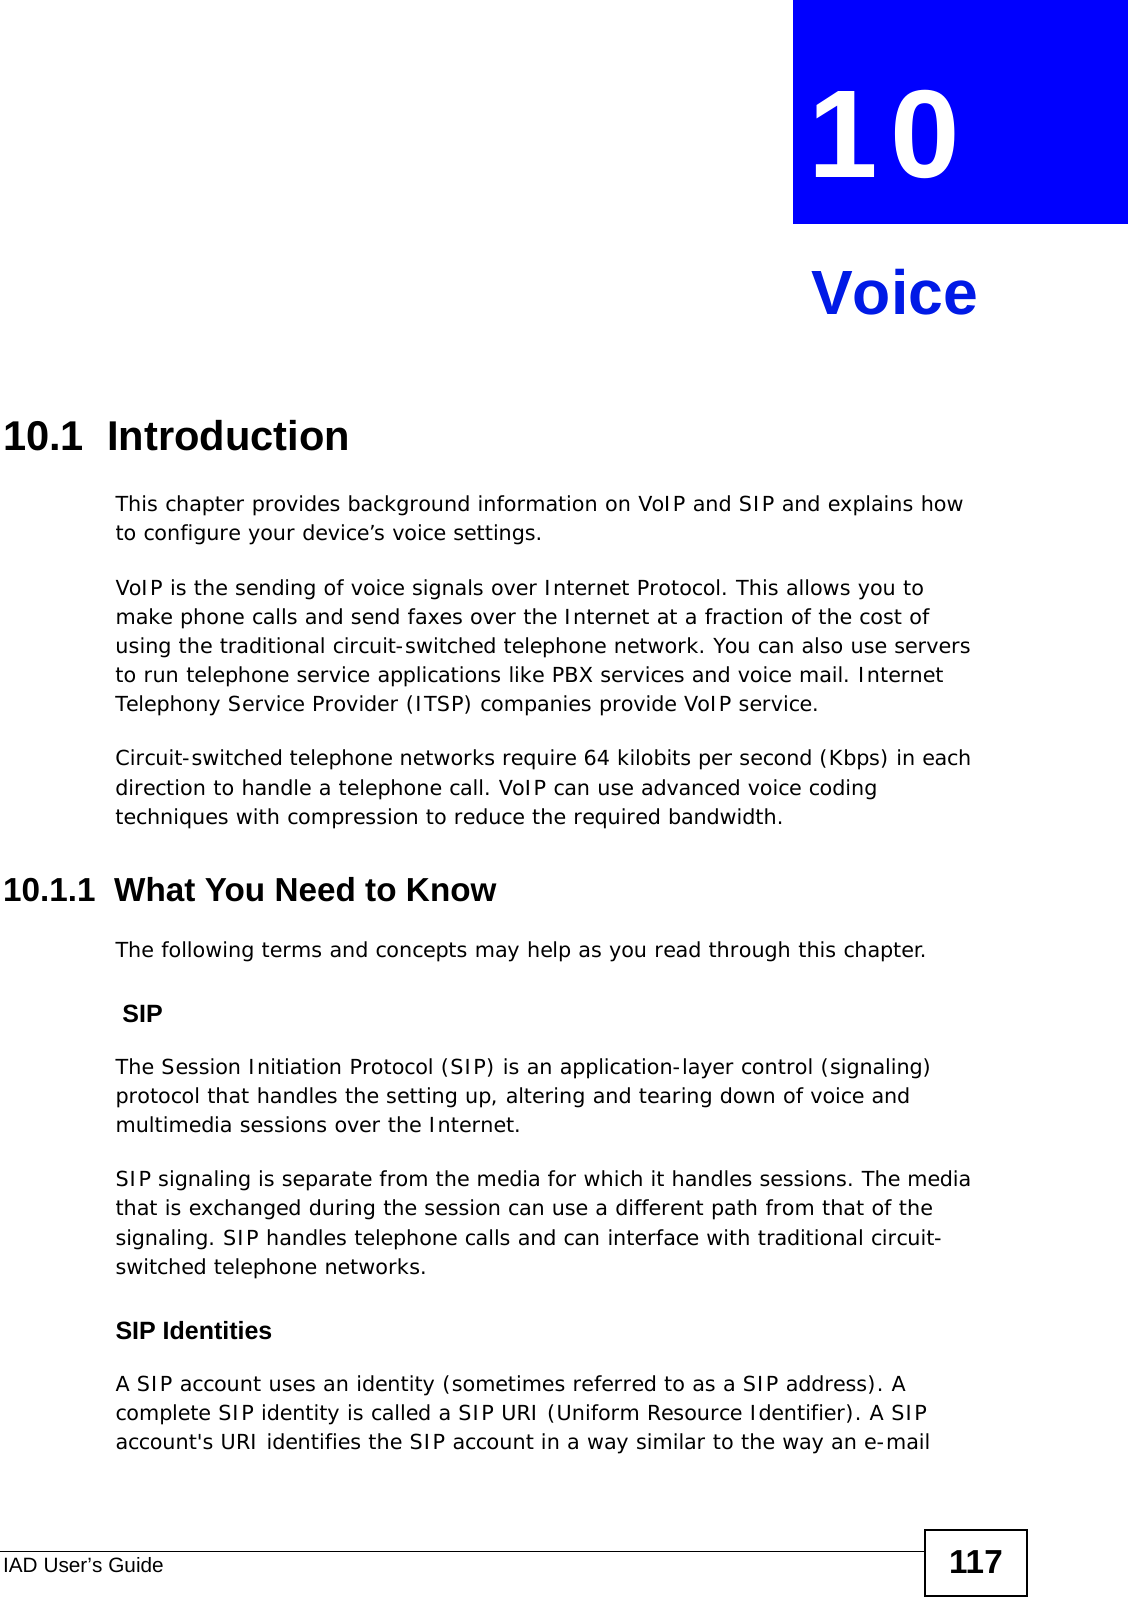 IAD User’s Guide 117CHAPTER  10 Voice10.1  Introduction This chapter provides background information on VoIP and SIP and explains how to configure your device’s voice settings.VoIP is the sending of voice signals over Internet Protocol. This allows you to make phone calls and send faxes over the Internet at a fraction of the cost of using the traditional circuit-switched telephone network. You can also use servers to run telephone service applications like PBX services and voice mail. Internet Telephony Service Provider (ITSP) companies provide VoIP service. Circuit-switched telephone networks require 64 kilobits per second (Kbps) in each direction to handle a telephone call. VoIP can use advanced voice coding techniques with compression to reduce the required bandwidth. 10.1.1  What You Need to KnowThe following terms and concepts may help as you read through this chapter. SIPThe Session Initiation Protocol (SIP) is an application-layer control (signaling) protocol that handles the setting up, altering and tearing down of voice and multimedia sessions over the Internet.SIP signaling is separate from the media for which it handles sessions. The media that is exchanged during the session can use a different path from that of the signaling. SIP handles telephone calls and can interface with traditional circuit-switched telephone networks.SIP IdentitiesA SIP account uses an identity (sometimes referred to as a SIP address). A complete SIP identity is called a SIP URI (Uniform Resource Identifier). A SIP account&apos;s URI identifies the SIP account in a way similar to the way an e-mail 